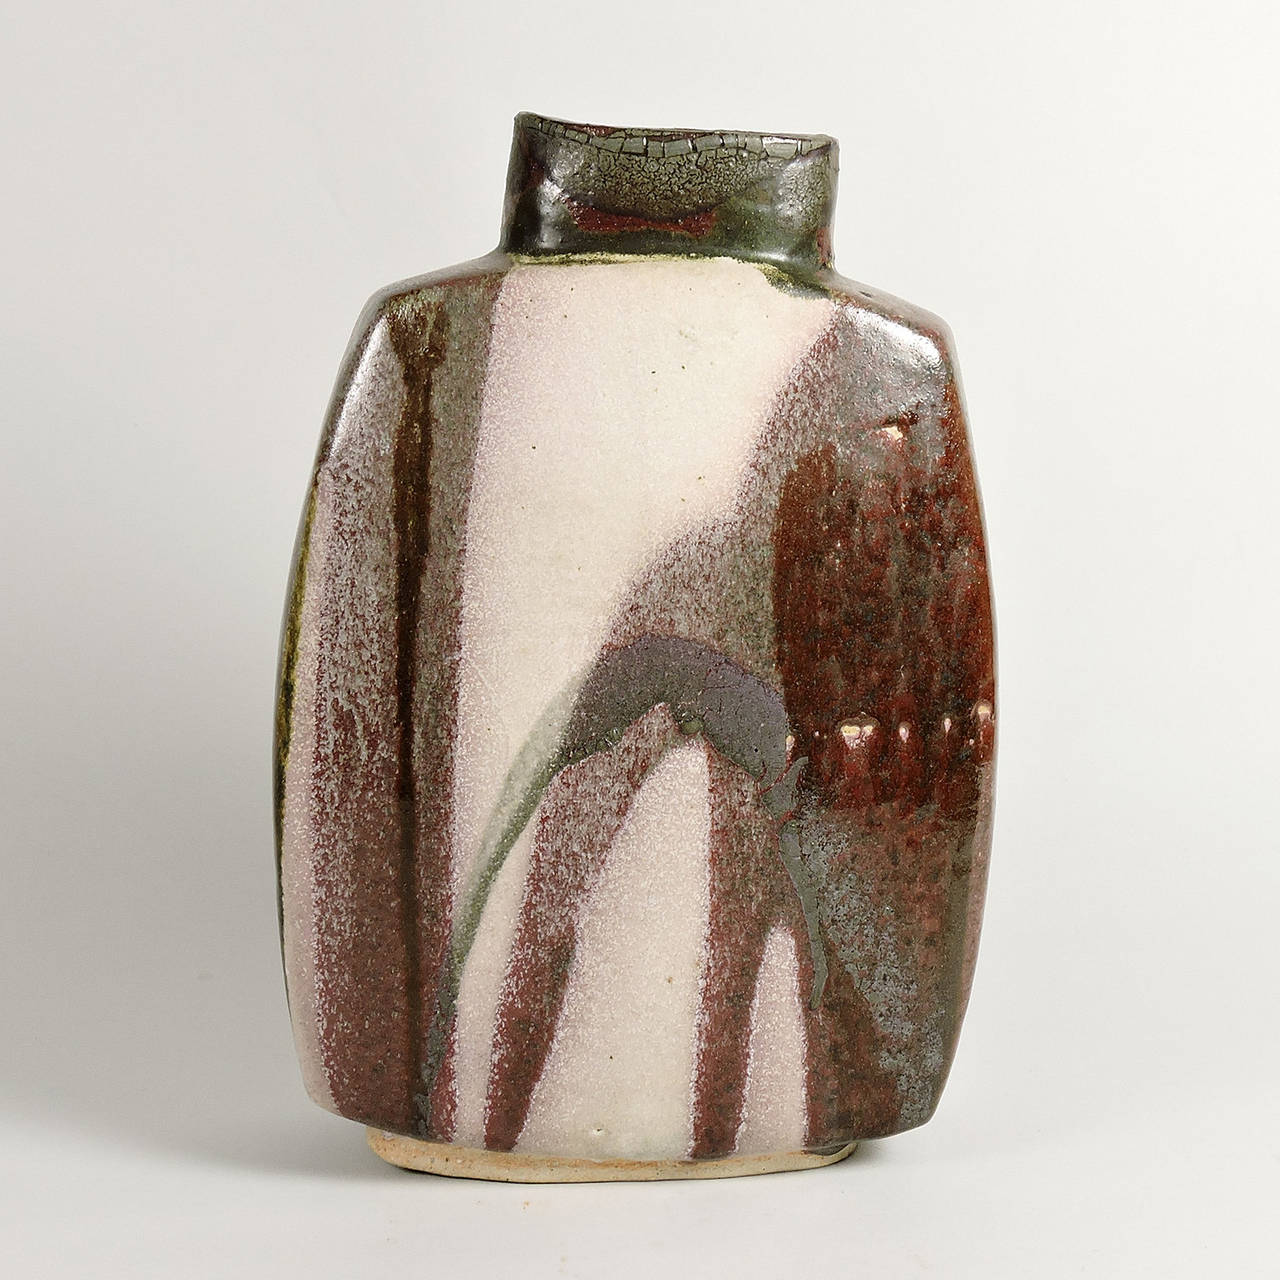 Doreen Blumhardt Slab Built and Poured Glaze Ceramic Vase, mid-20th century. 
Dimensions: 13 3/4 x 9 x 3 1/2 inches. 

Dame Doreen Blumhardt (1914-2009), worked as a ceramicist, becoming one of the New Zealand's most distinguished potters. She